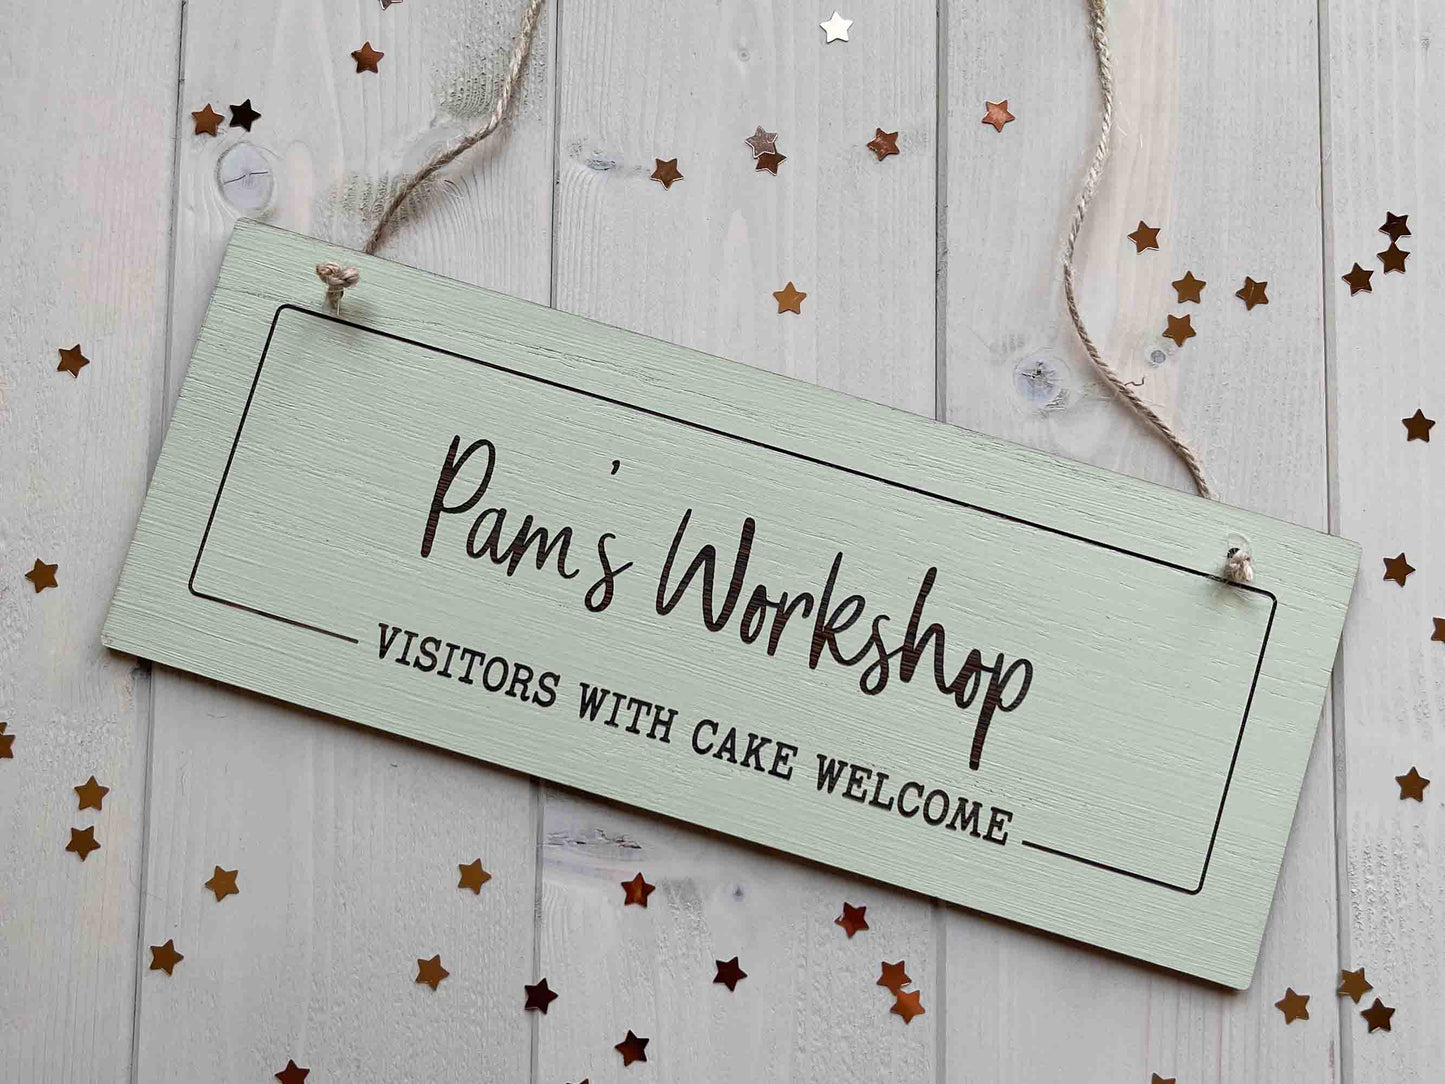 Rustic Charm - Our wooden sign comes in 6 vintage inspired colours to match your decor